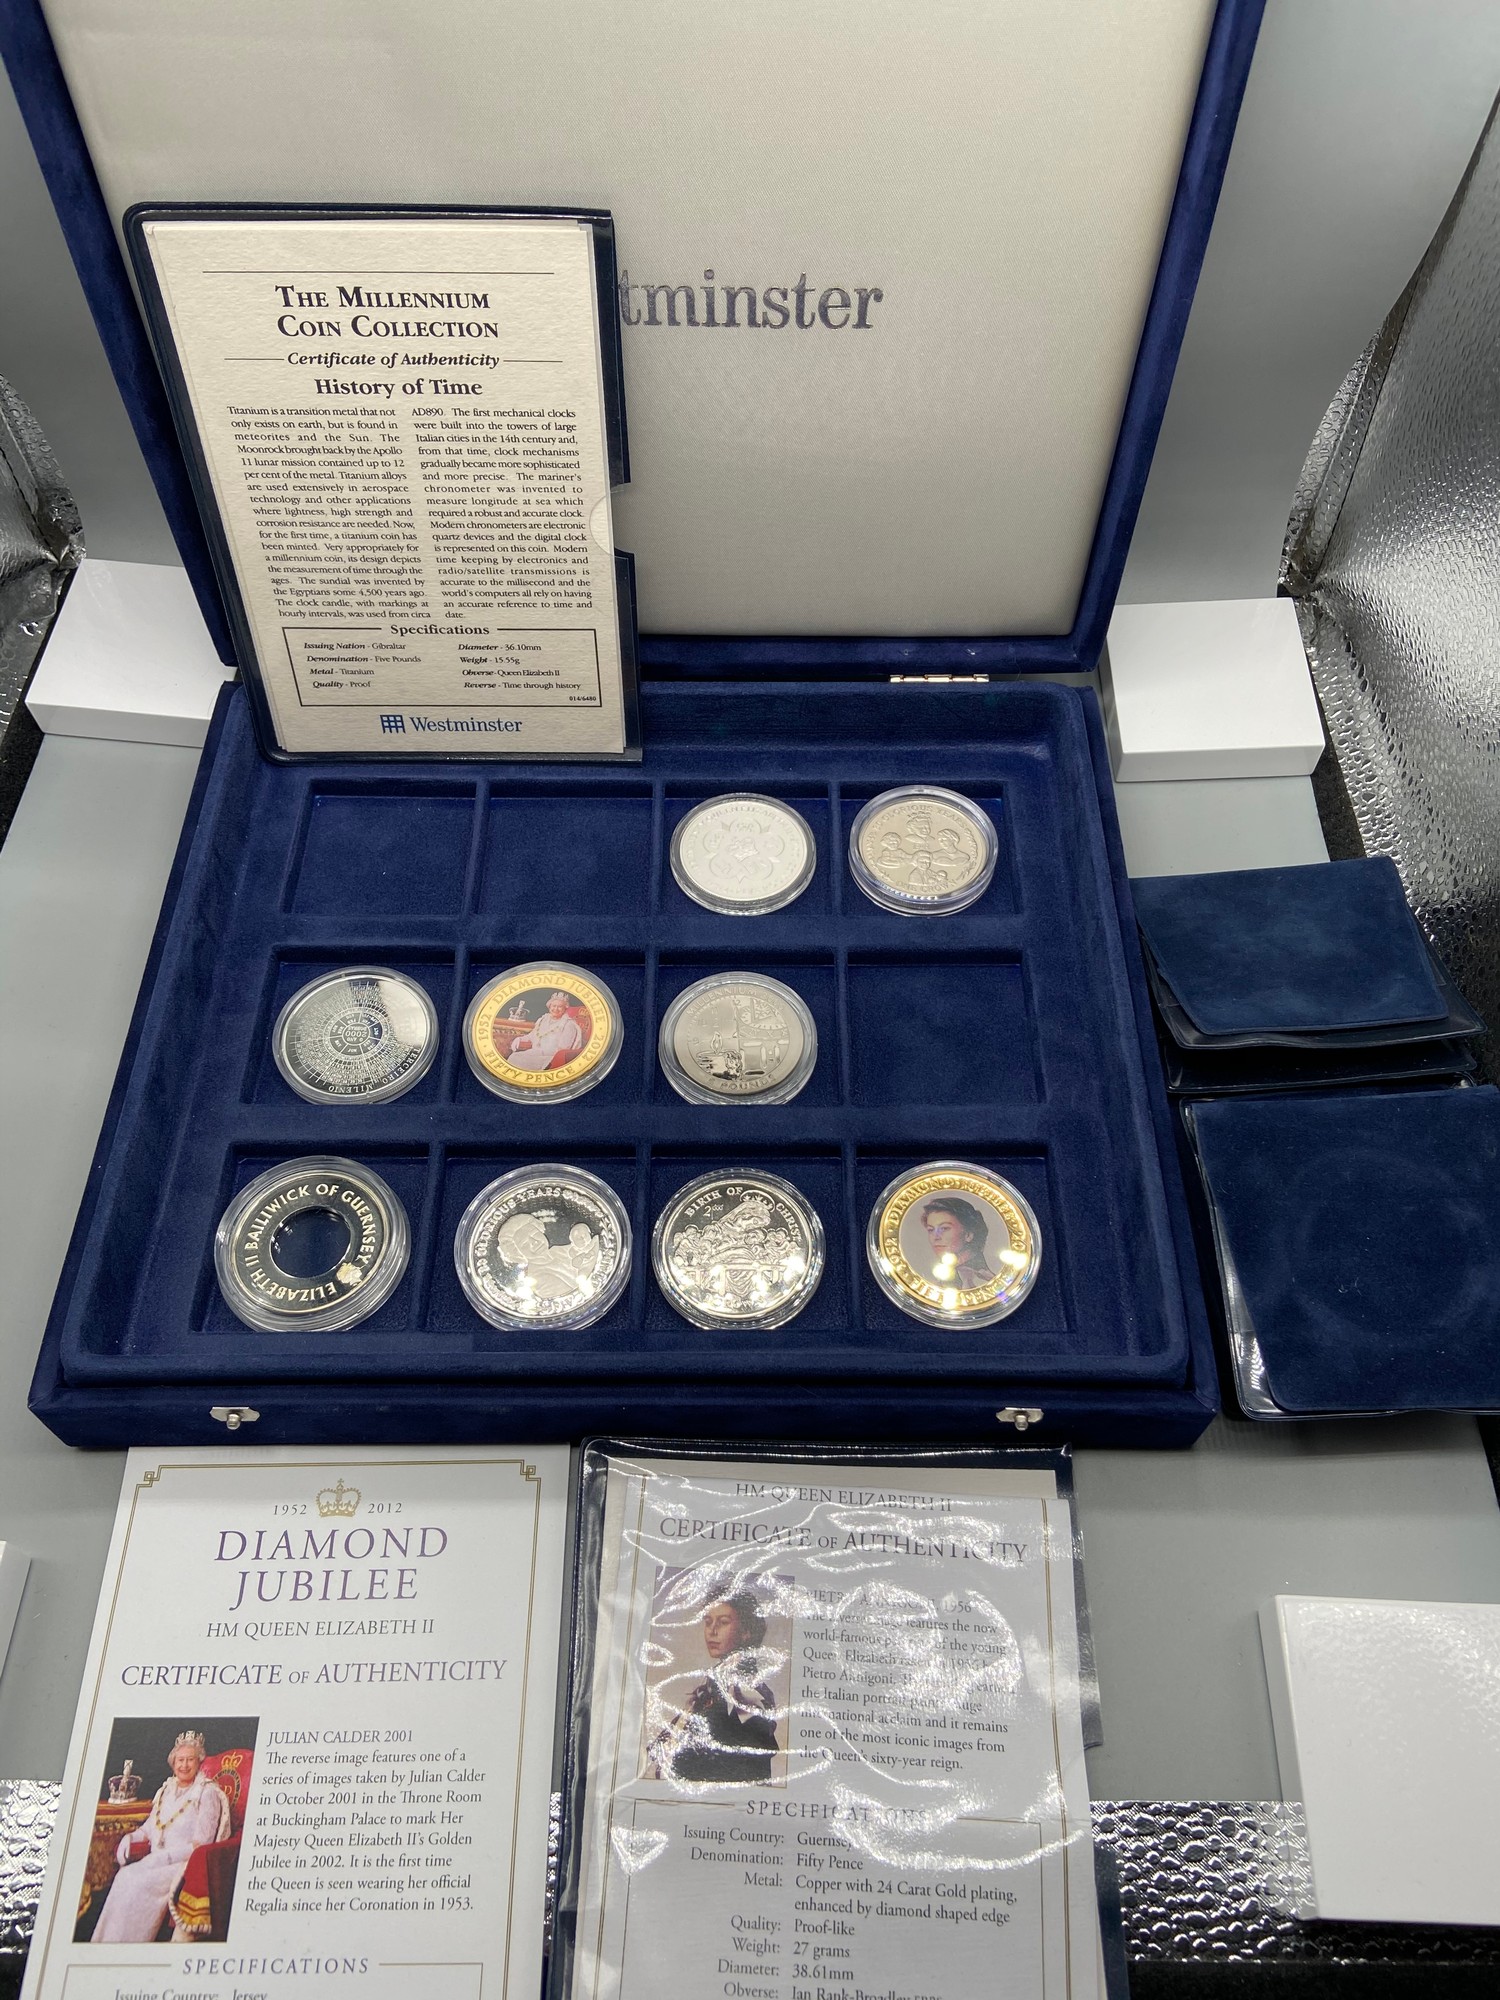 A Westminster Mint 'The Millennium' coin collection [4 coins] with a ...